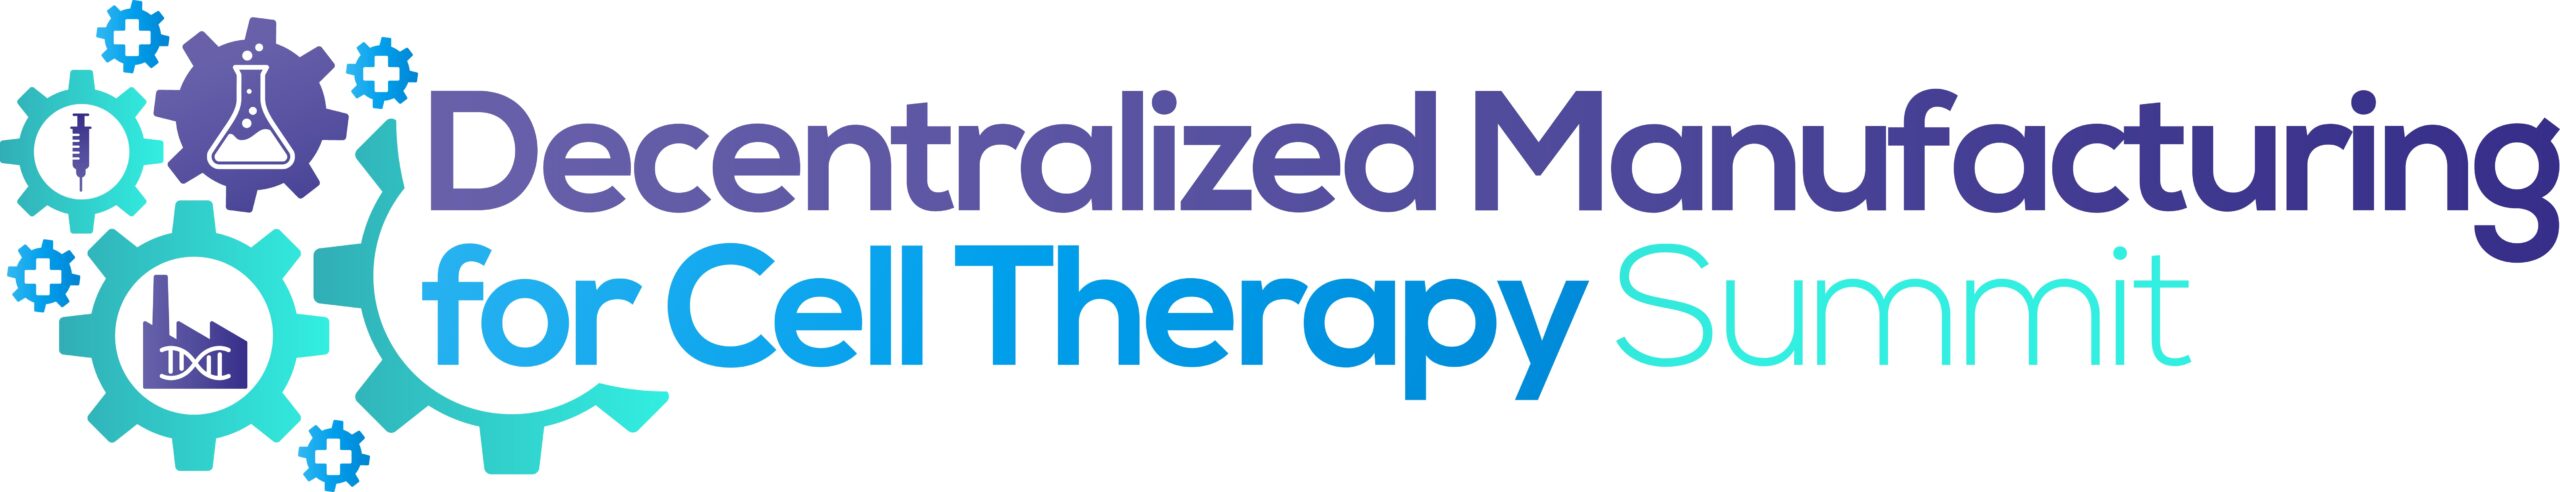 Decentralized Manufacturing for Cell Therapy Summit Logo